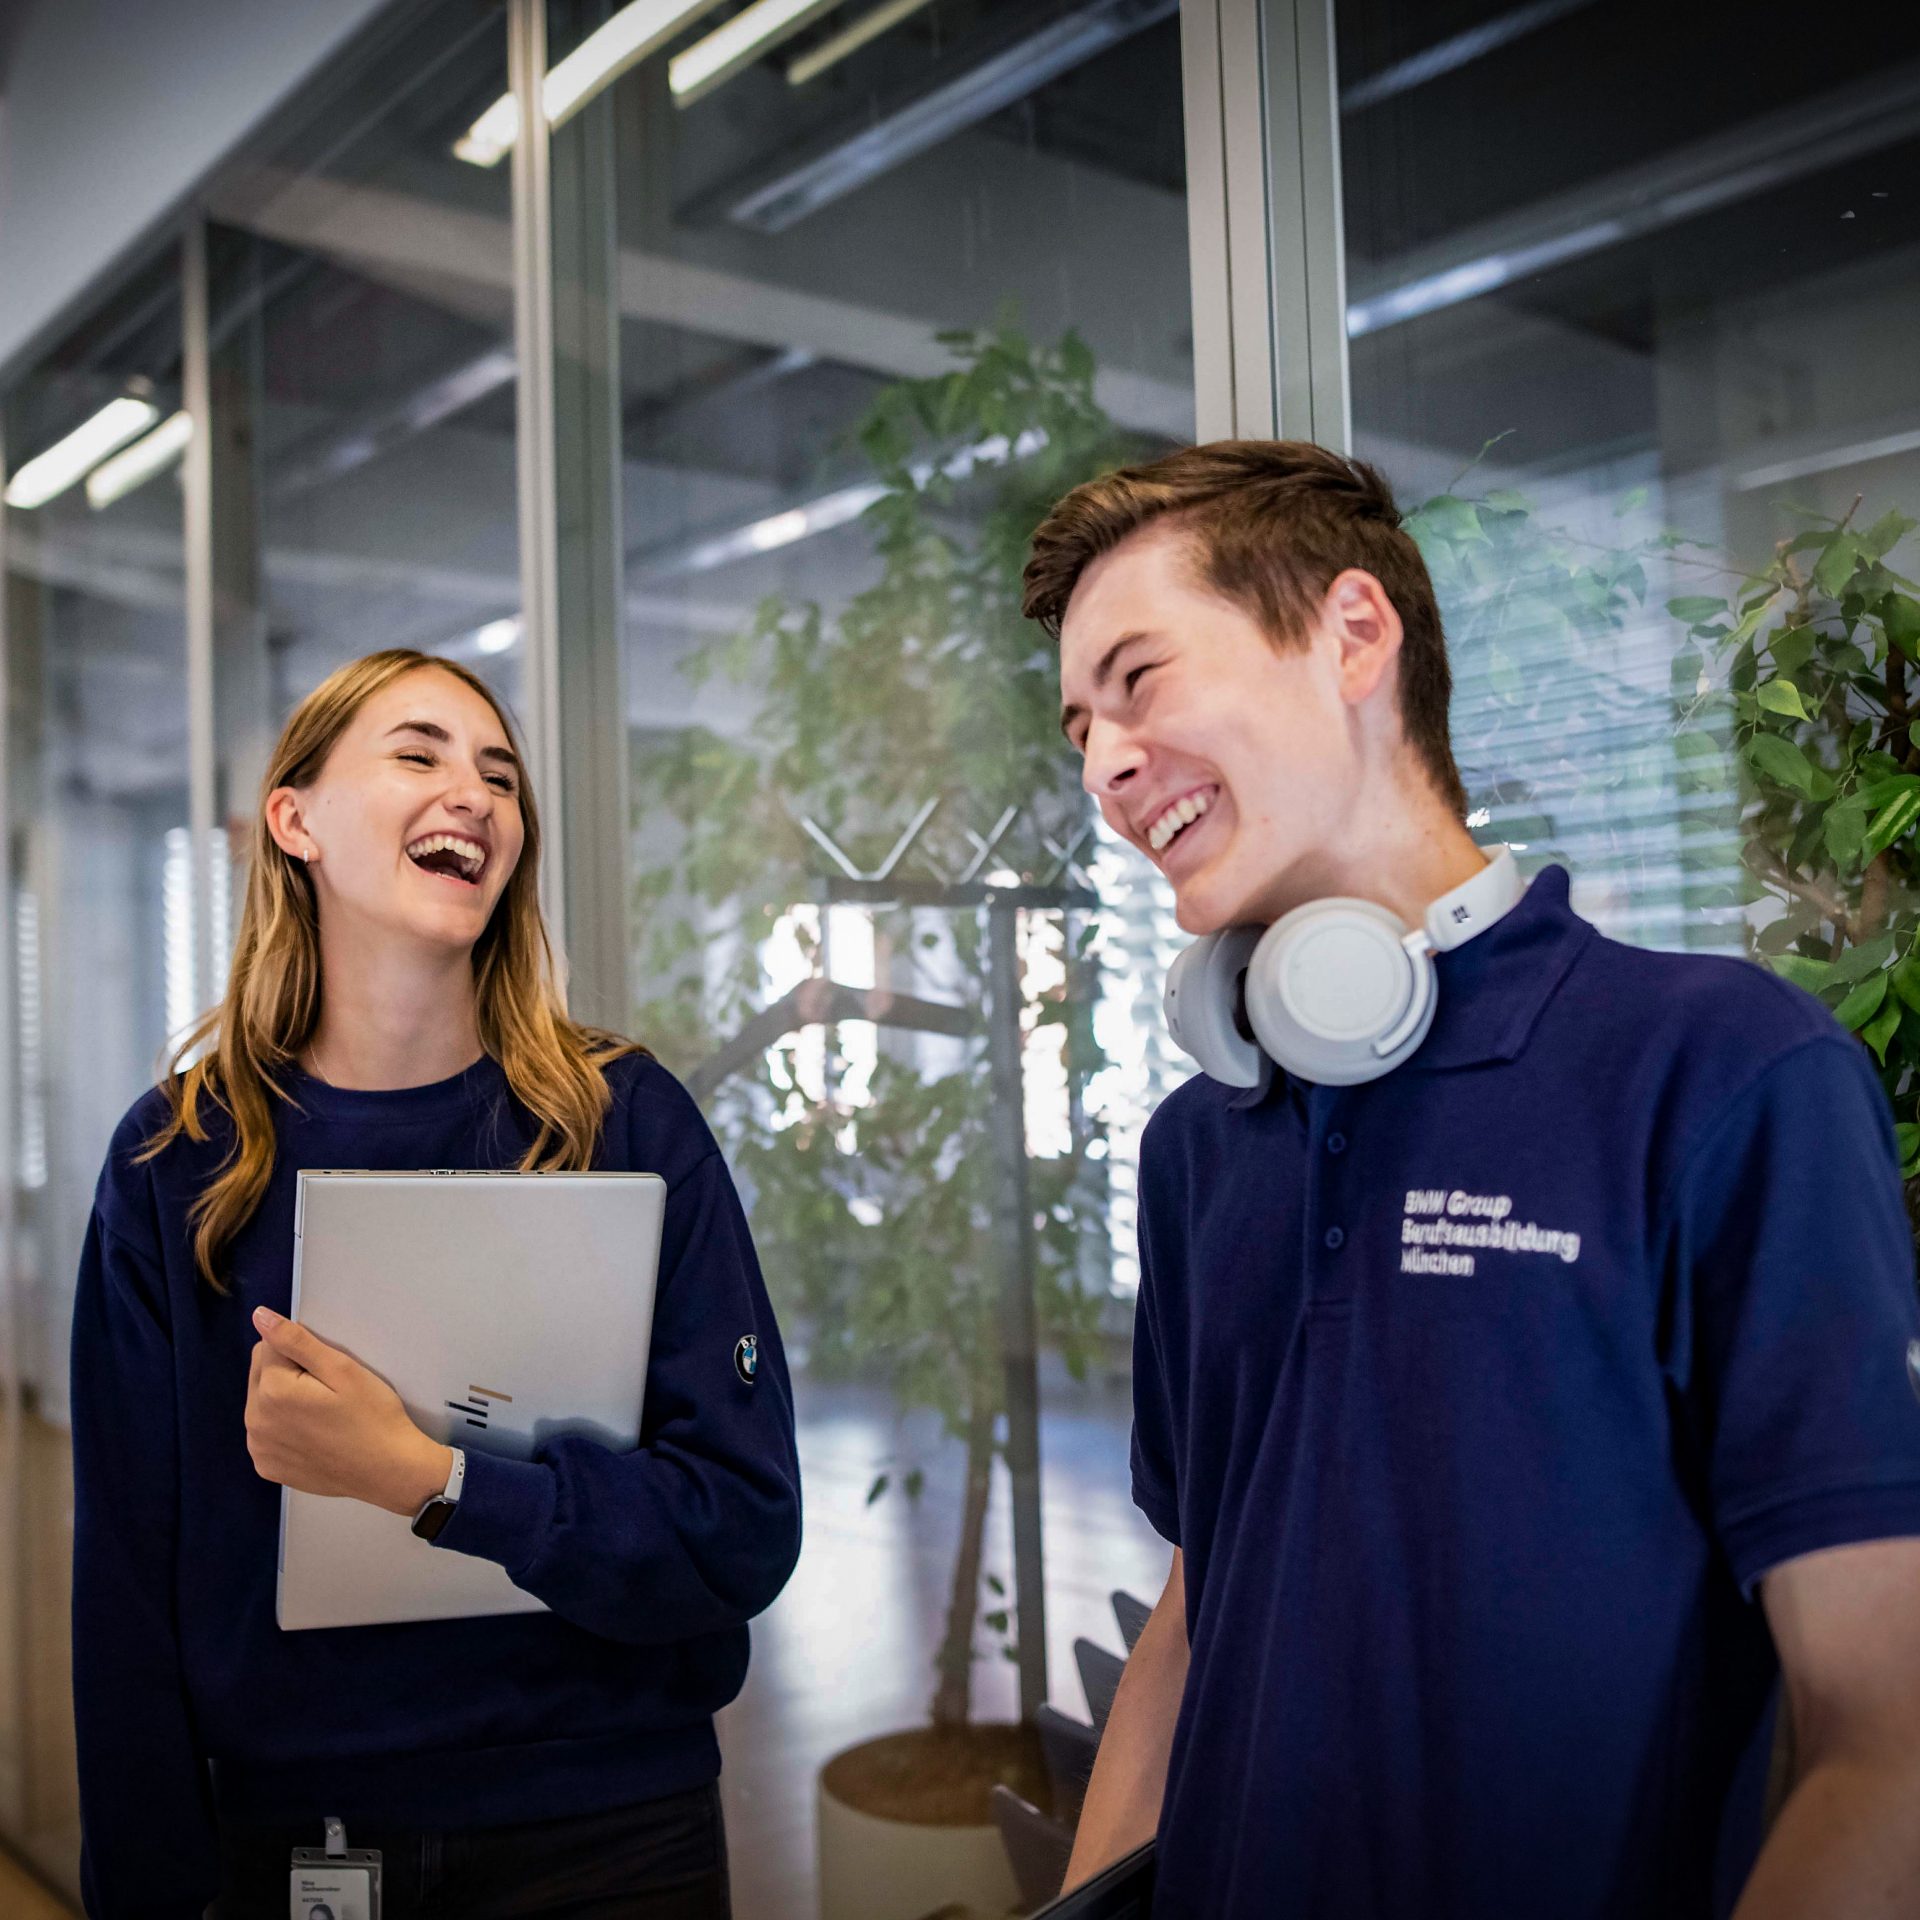 The picture shows two laughing apprentices in the office.